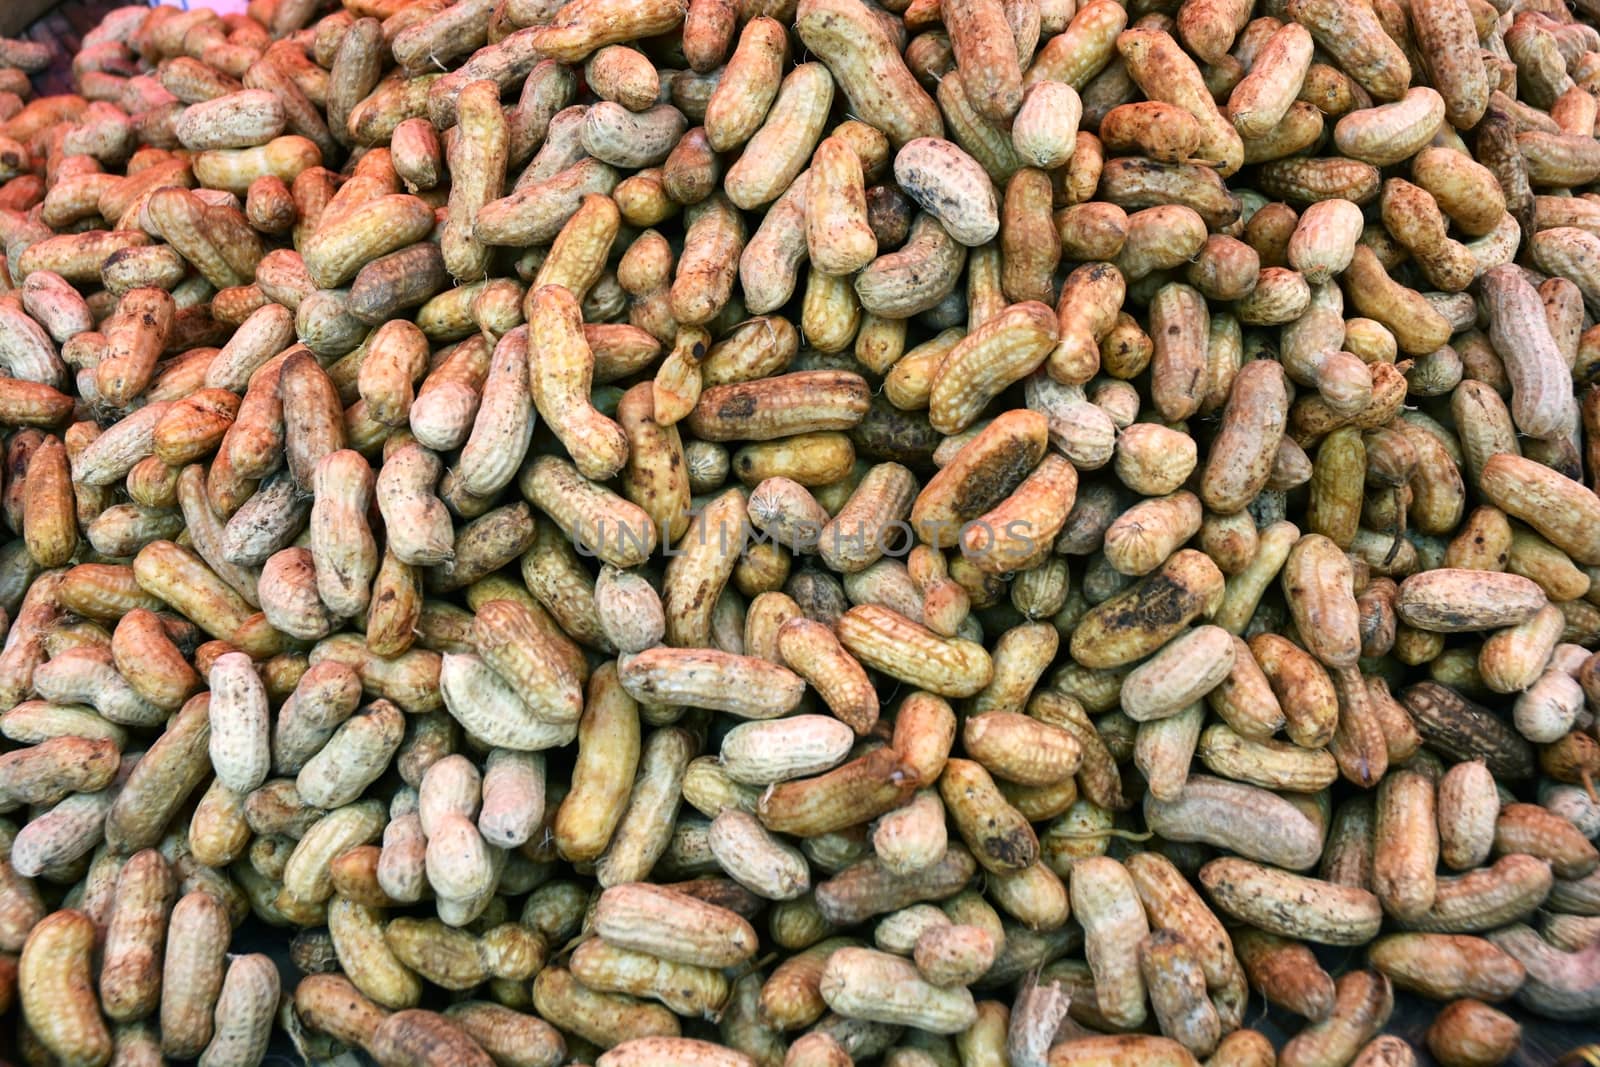 A pile of roasted peanuts in their shells